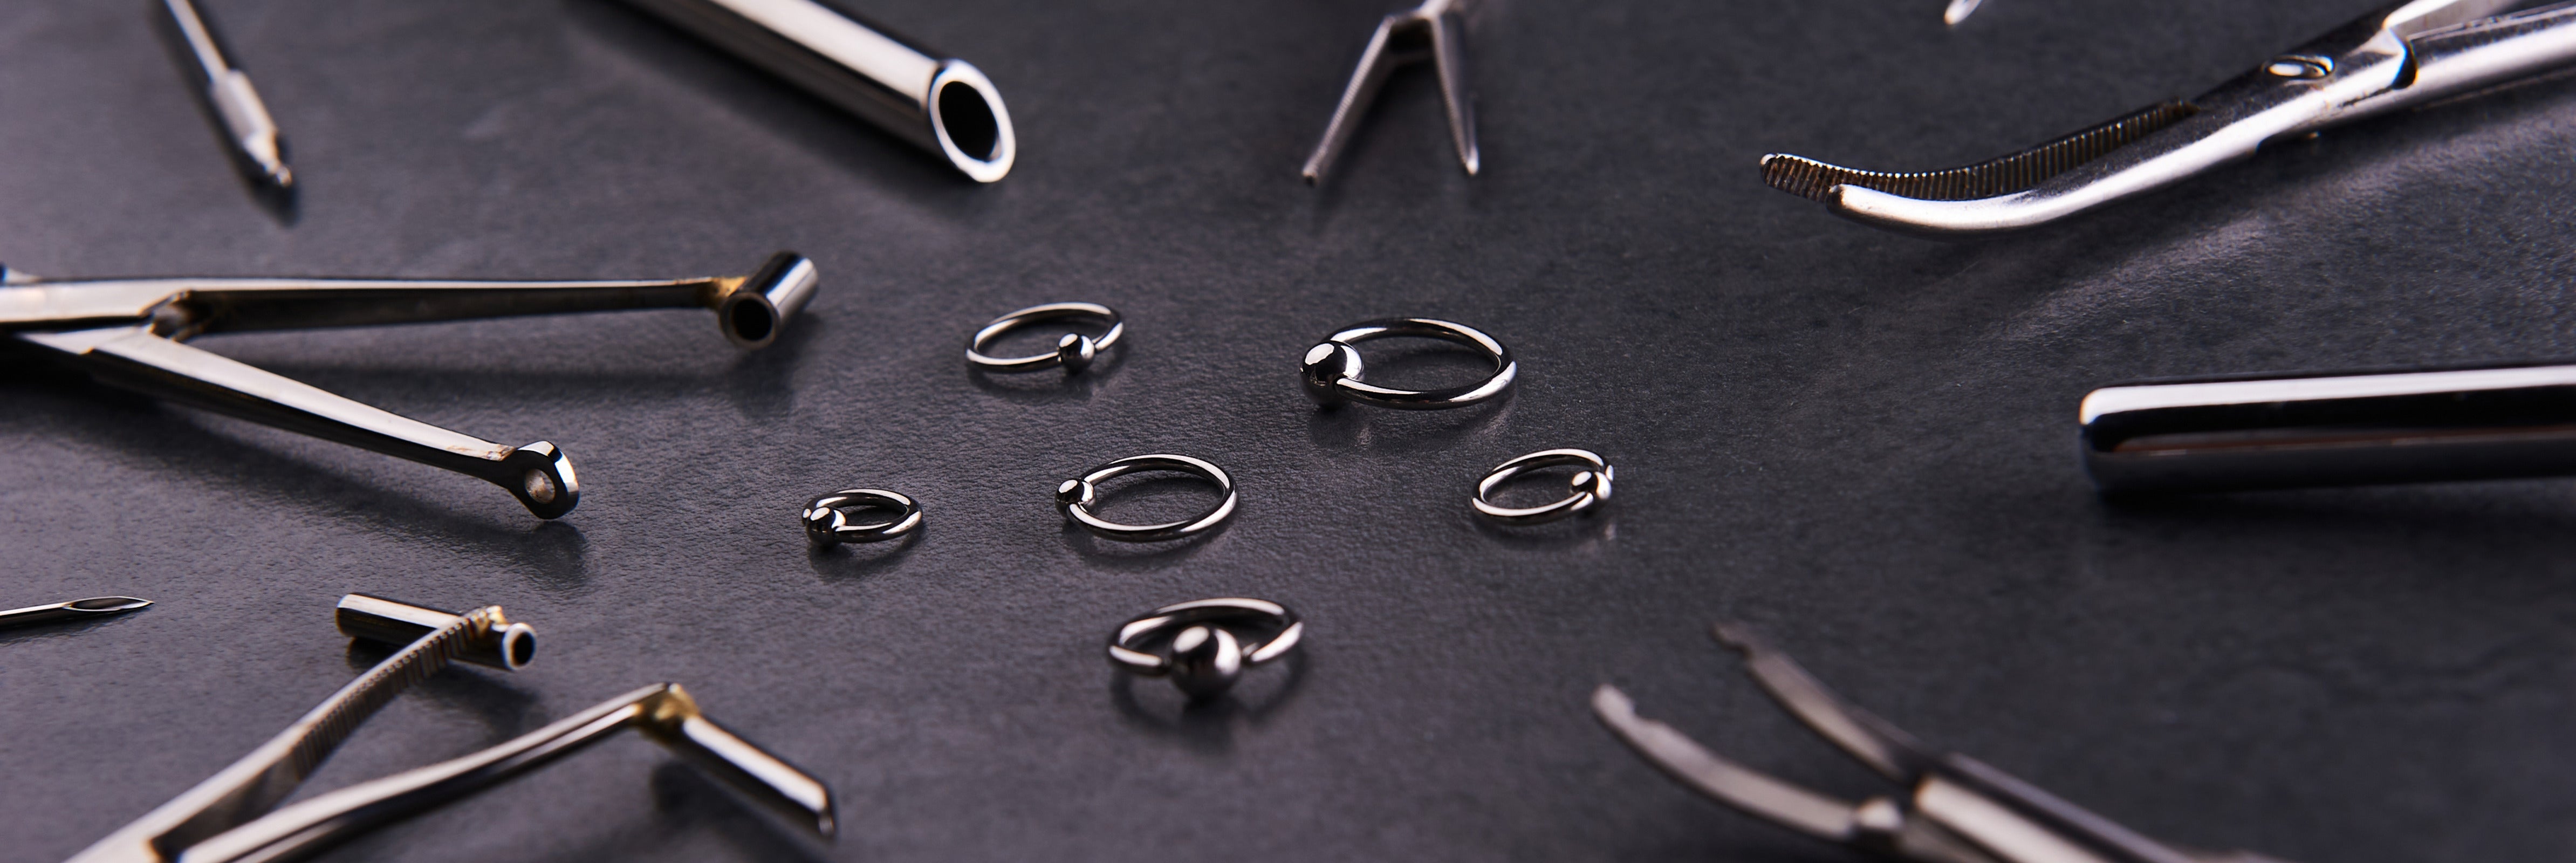 Piercing Shops and Jewelry Options for the Most Trendy Piercing